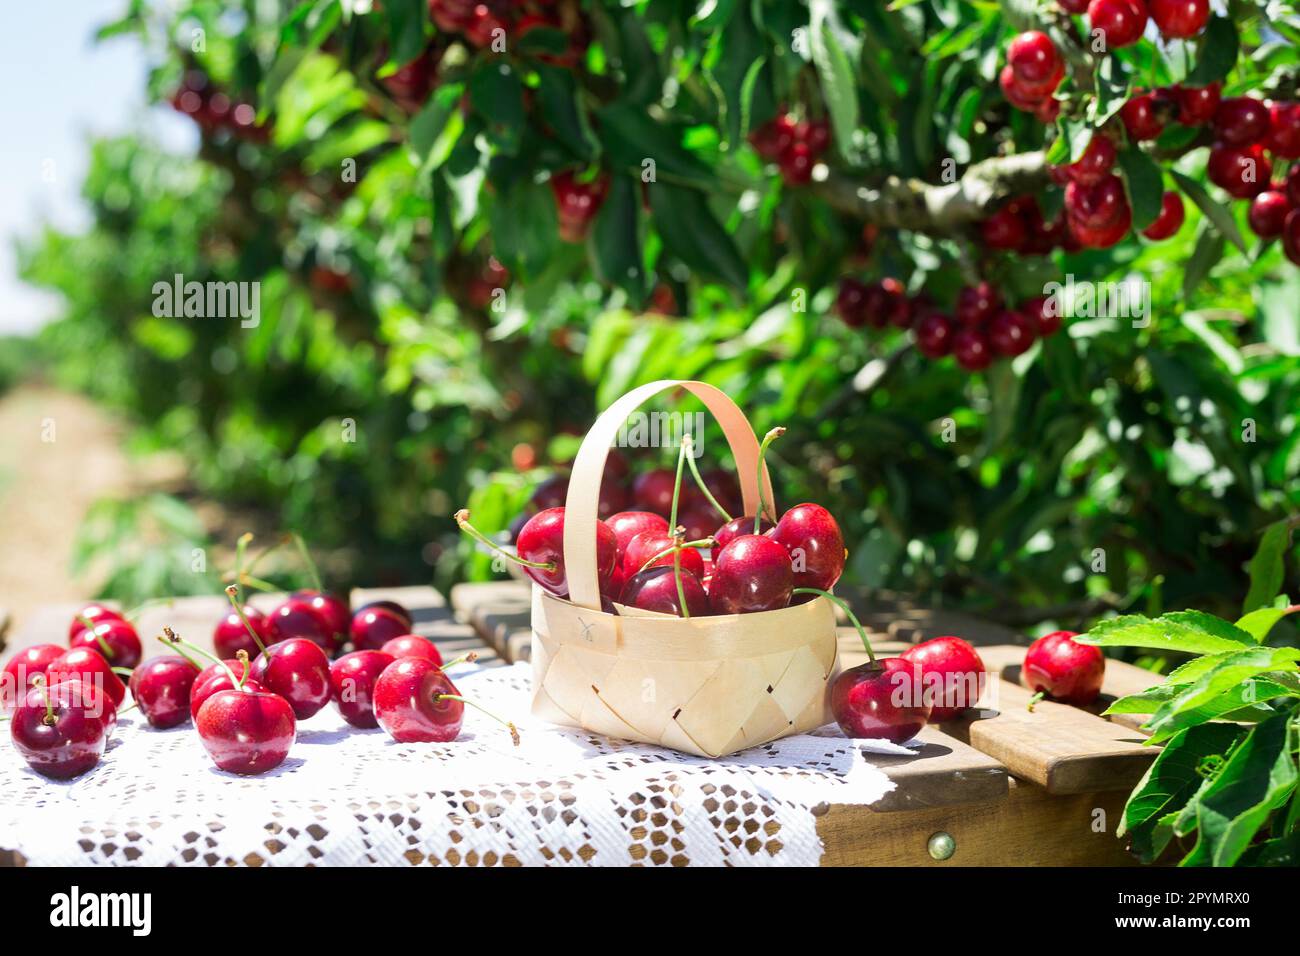 wicker basket filled with ripe cherries on table against background of cherry trees with cherry berries Stock Photo